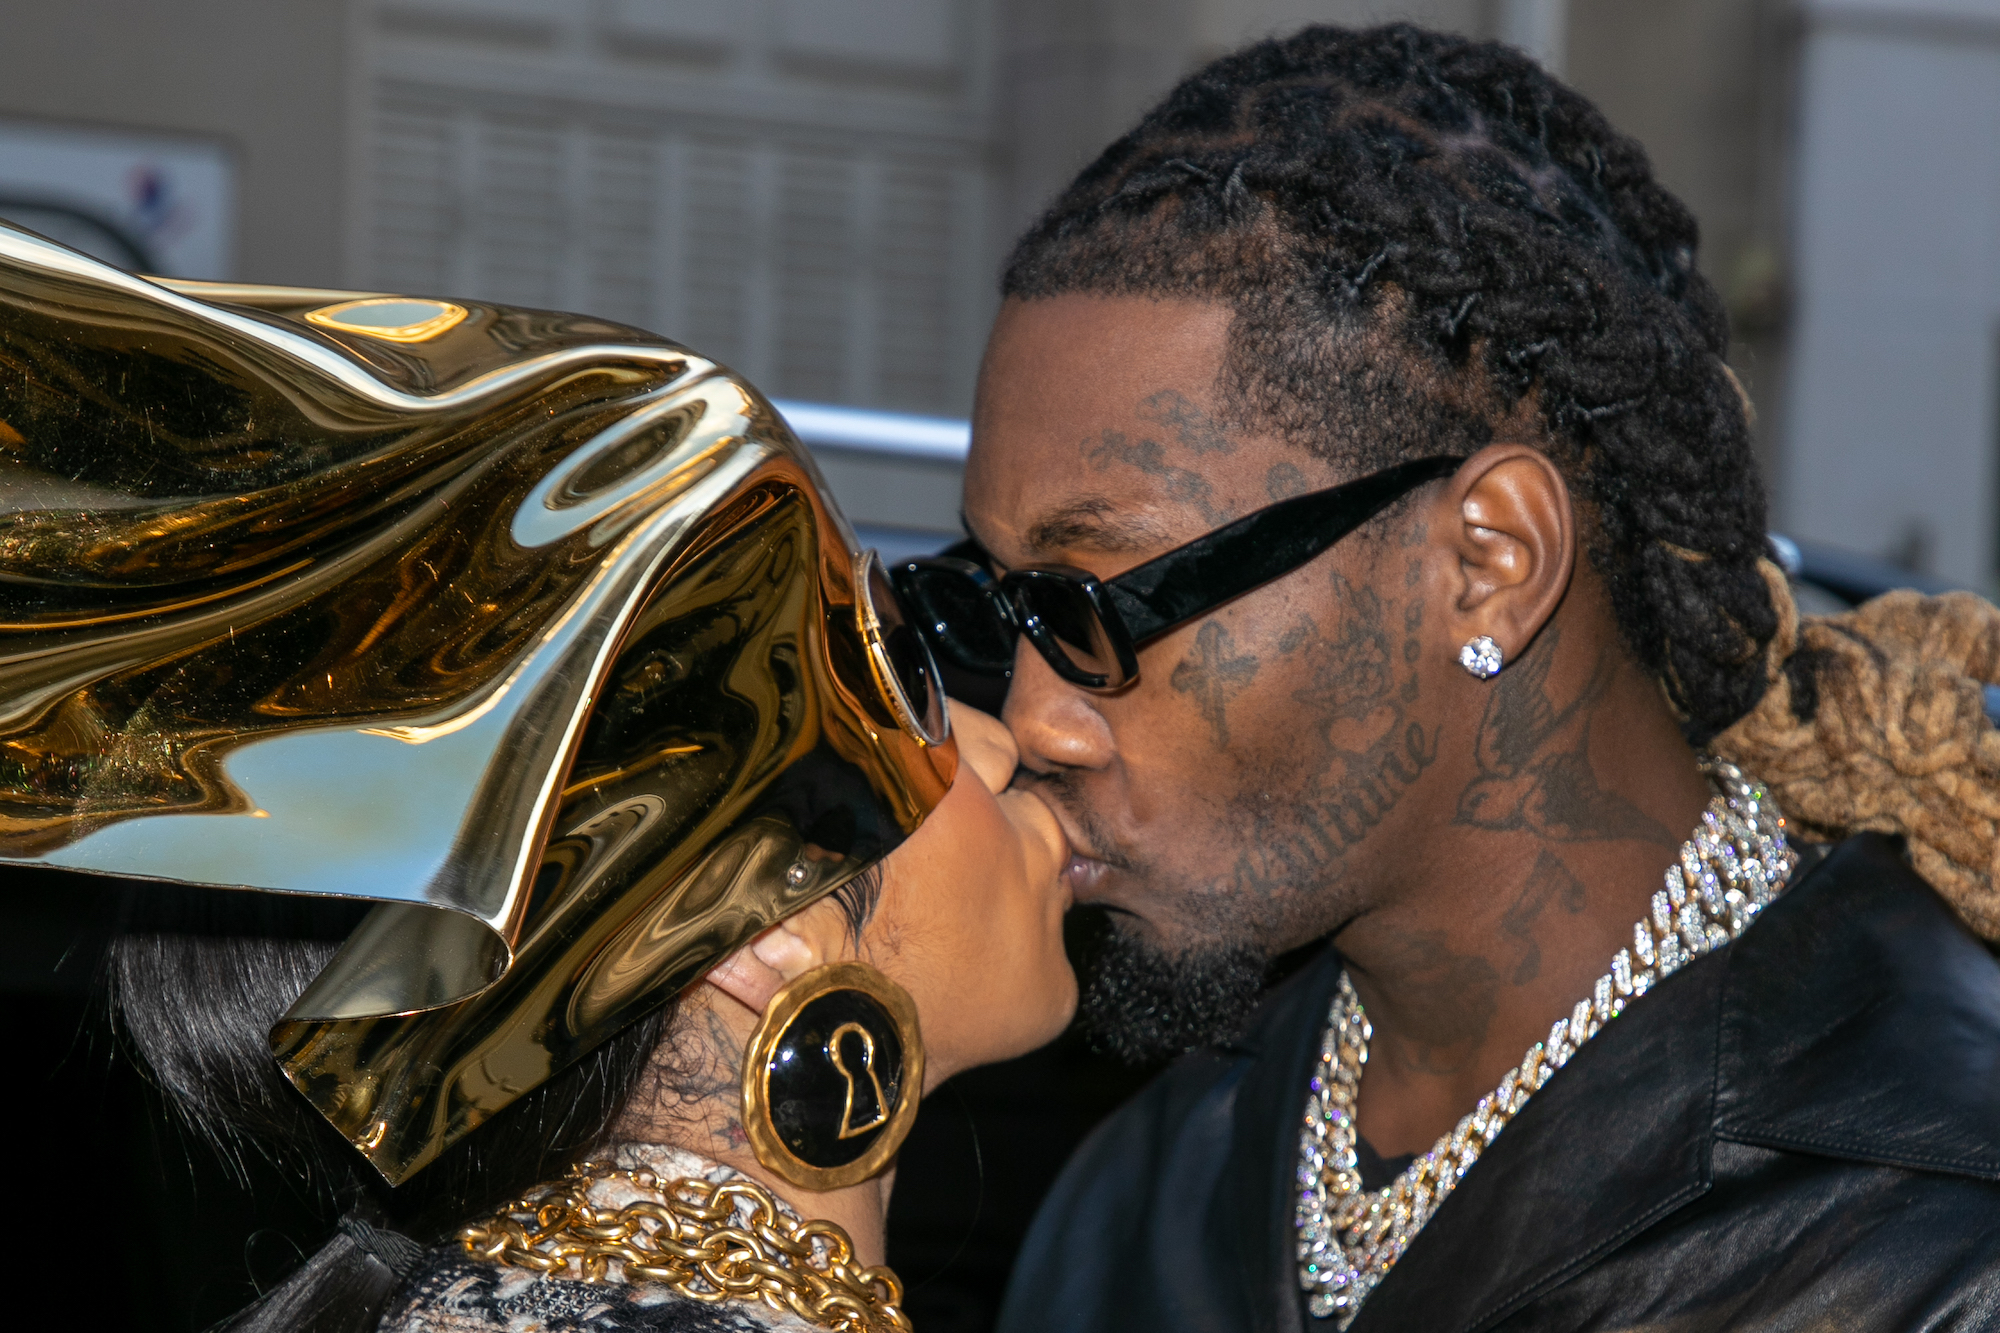 Cardi B and Offset kissing